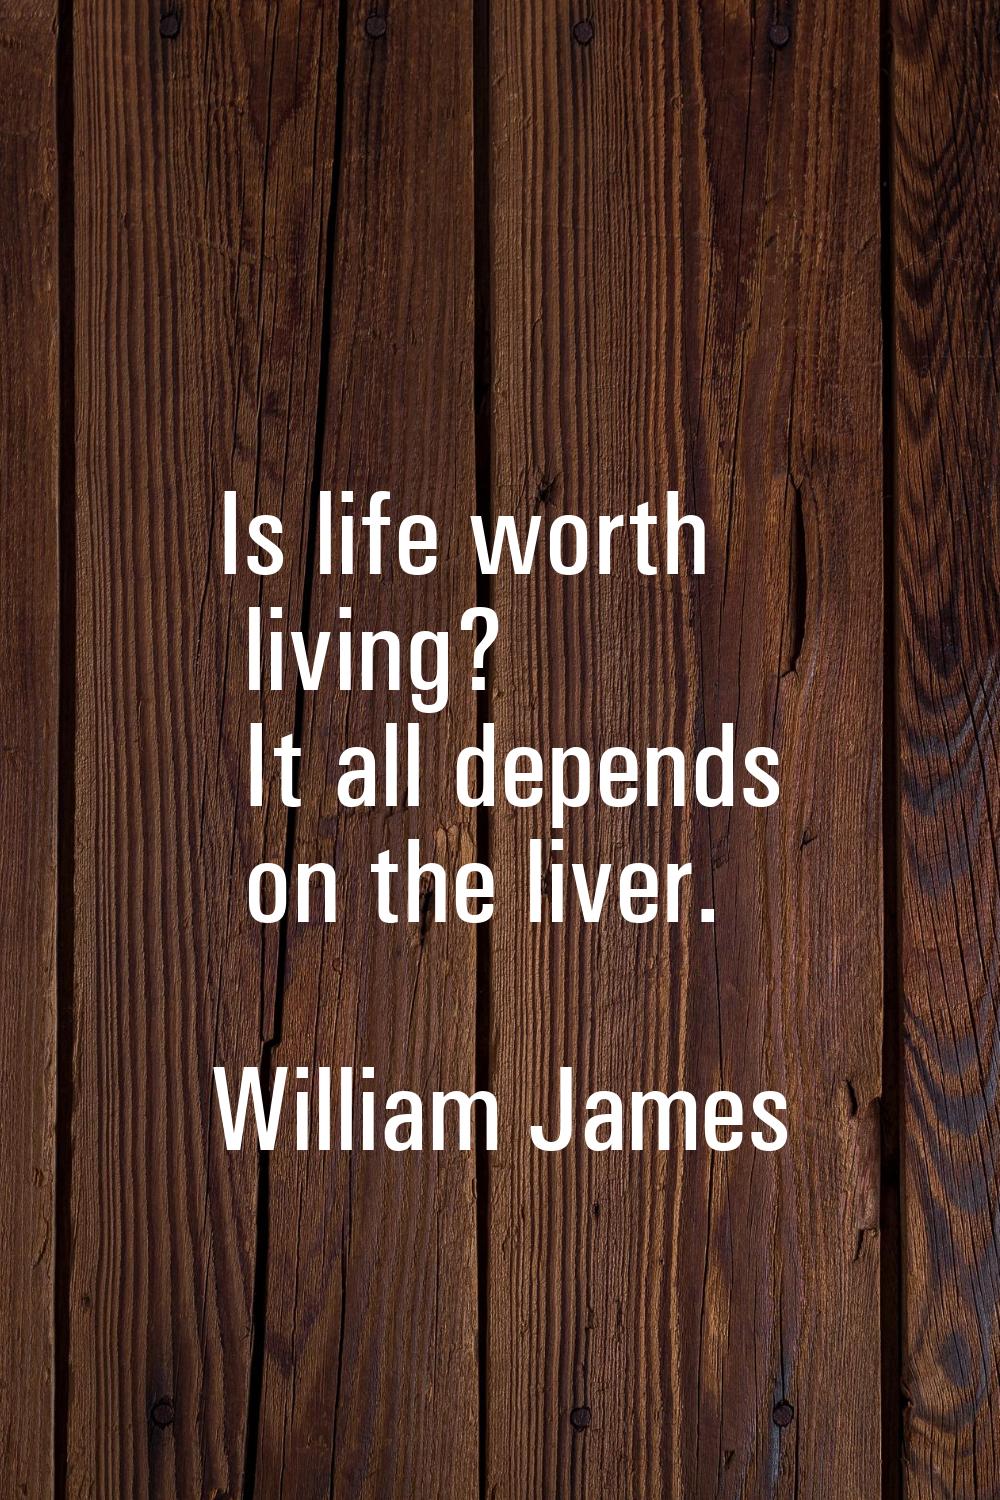 Is life worth living? It all depends on the liver.